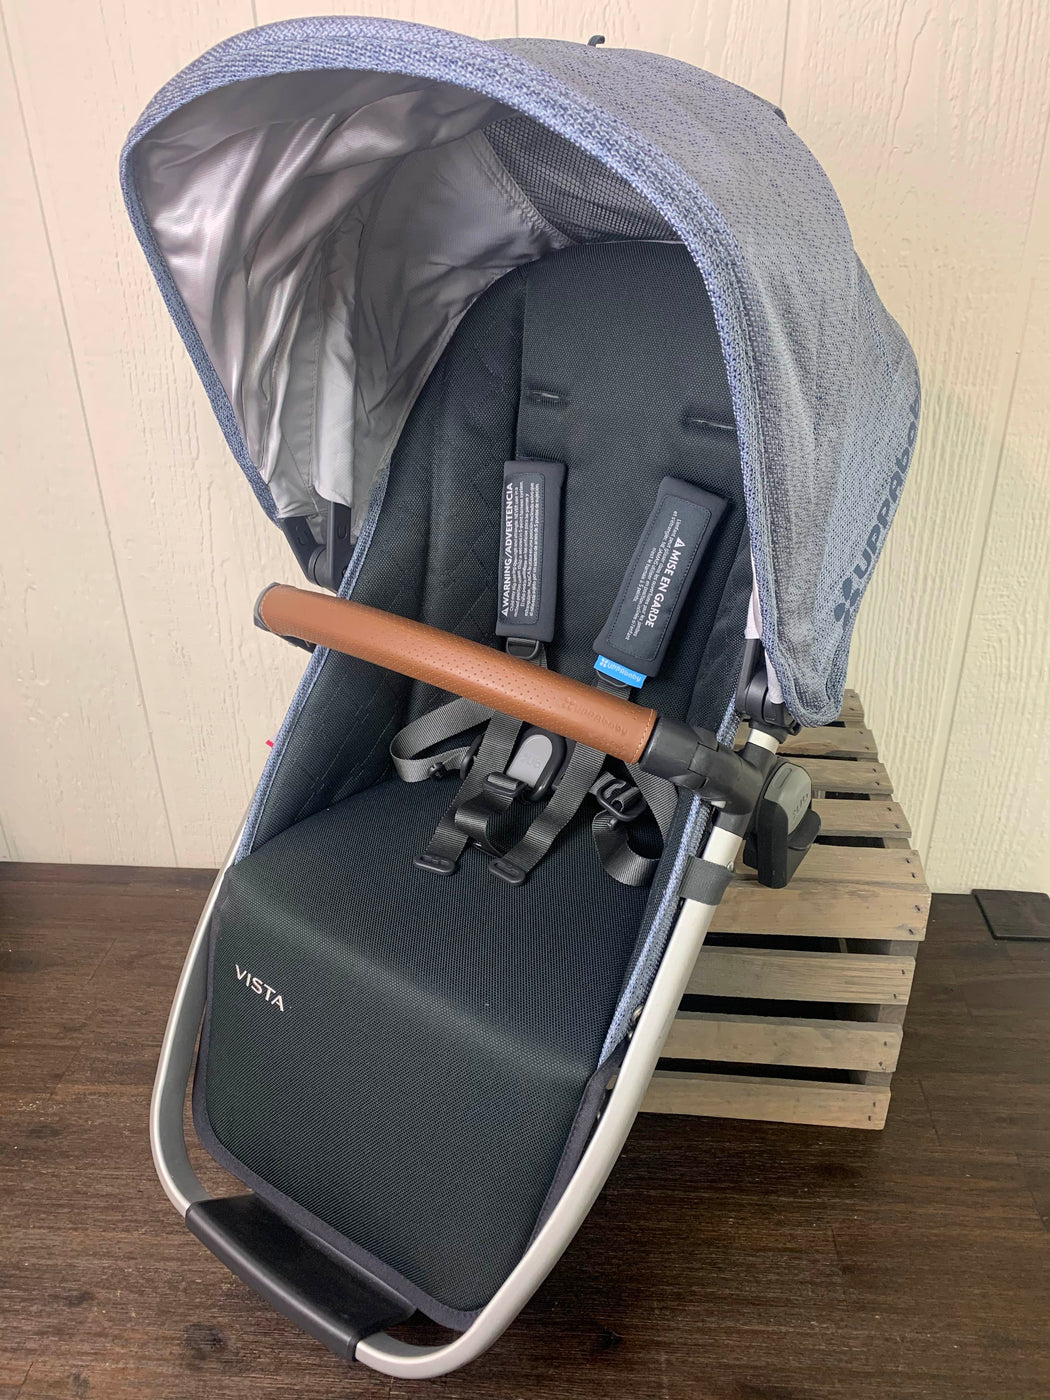 uppababy henry rumble seat